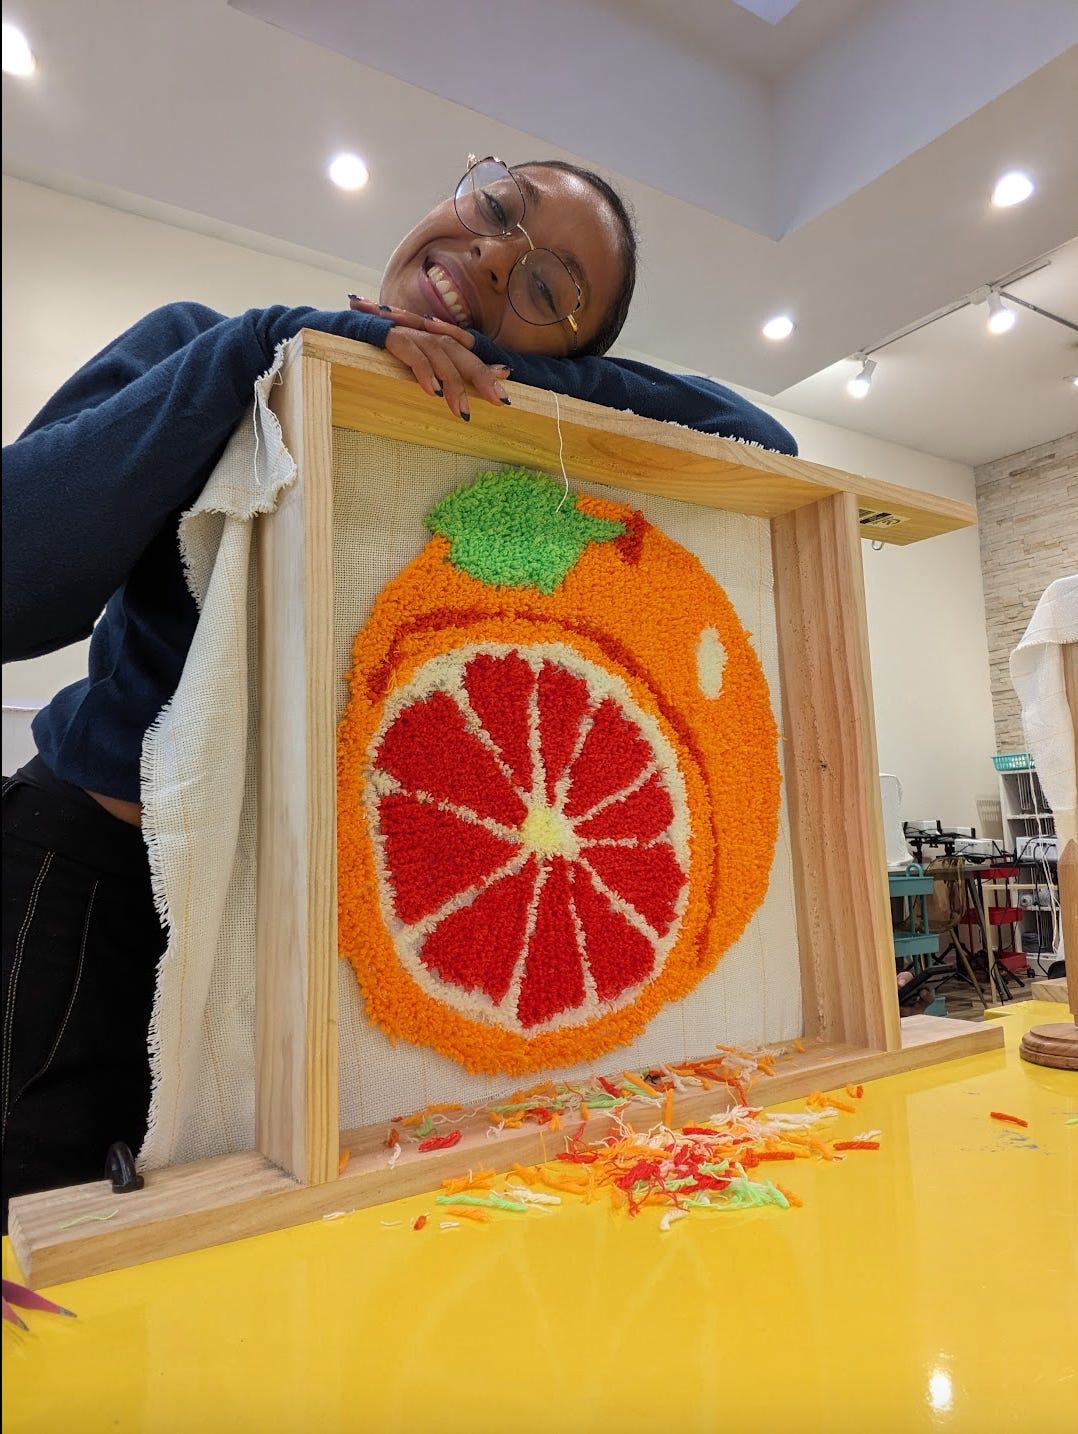 Nathalie is resting her arms and head atop her tufted rug panel. She has a big smile on her face, proud of the work she created. Her tufted rug is of a bright orange and red grapefruit.